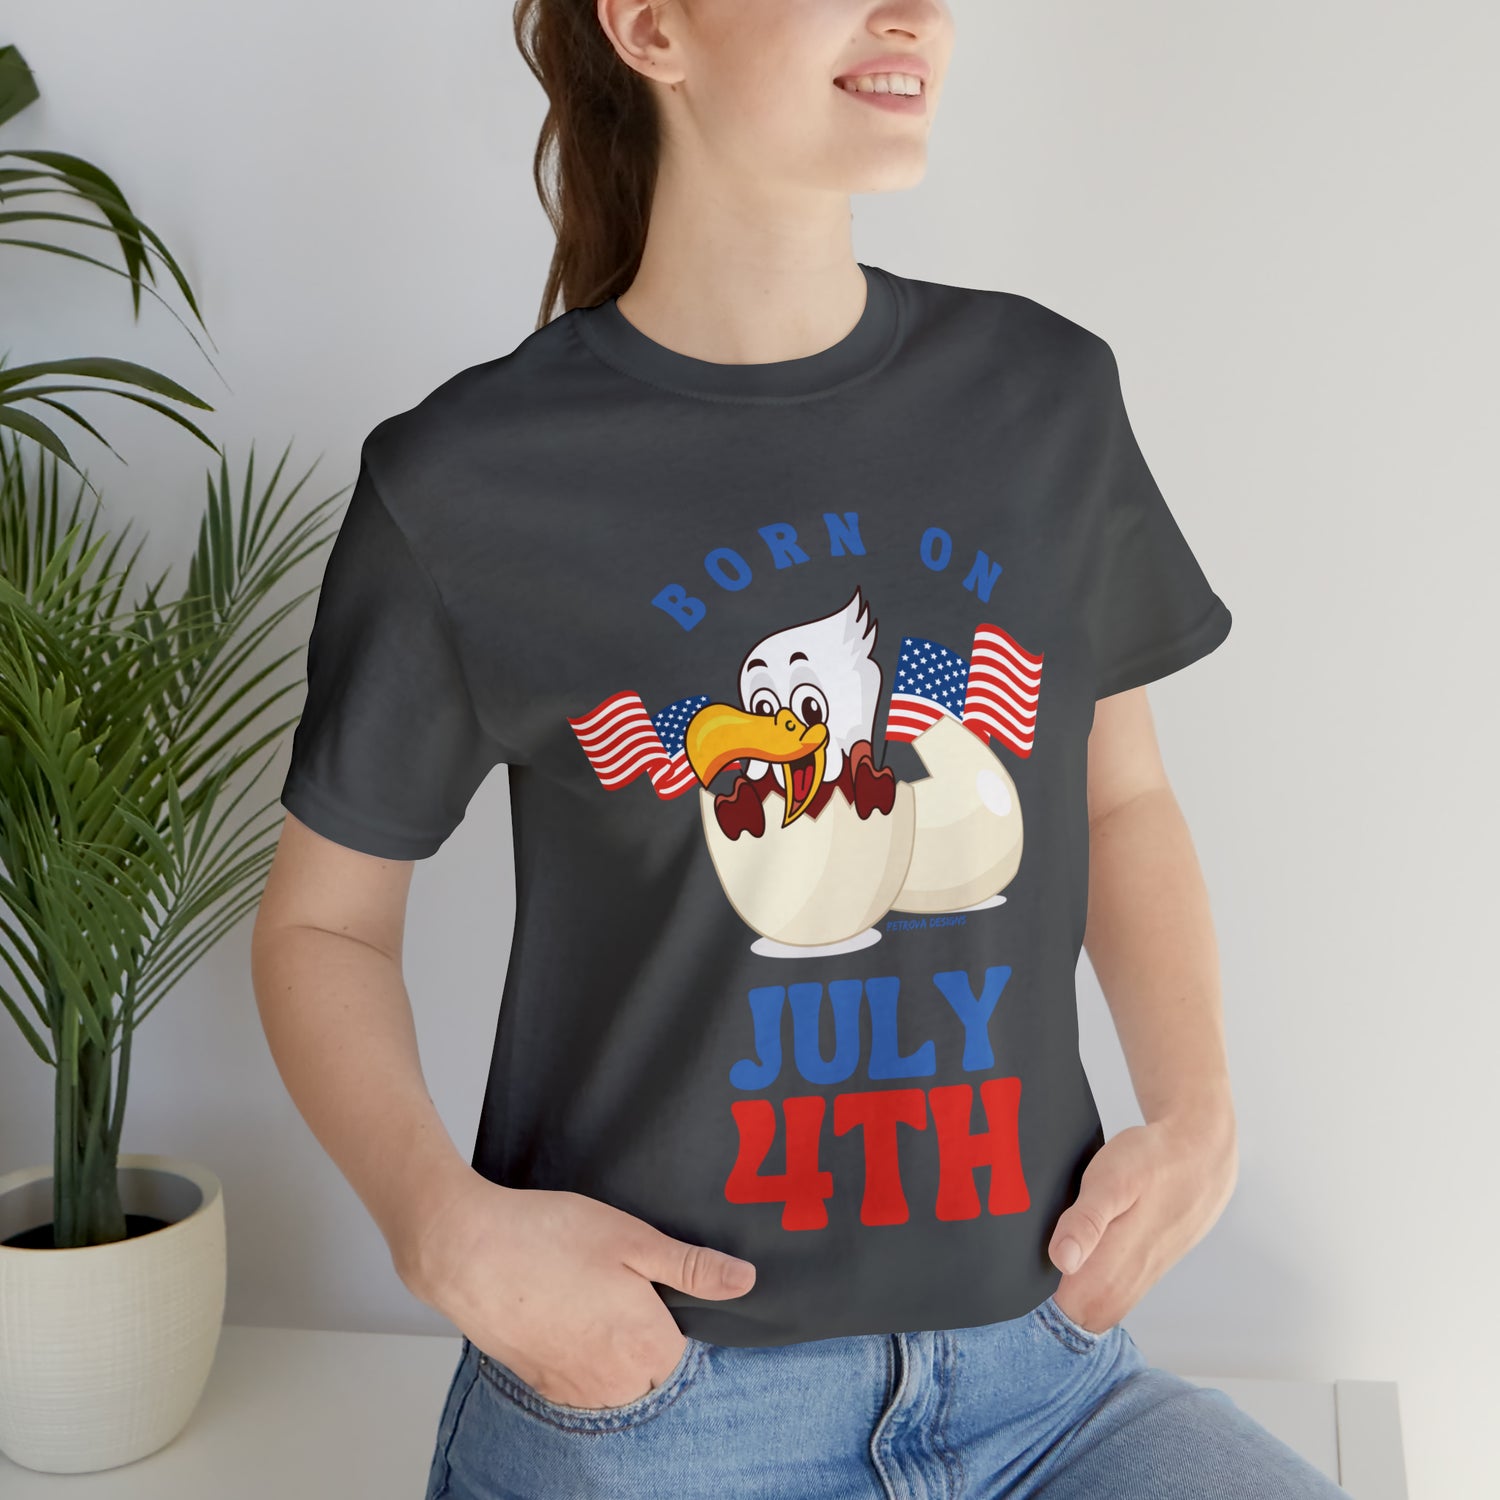 Asphalt T-Shirt Tshirt Design Gift for Friend and Family Short Sleeved Shirt 4th of July Independence Day Petrova Designs